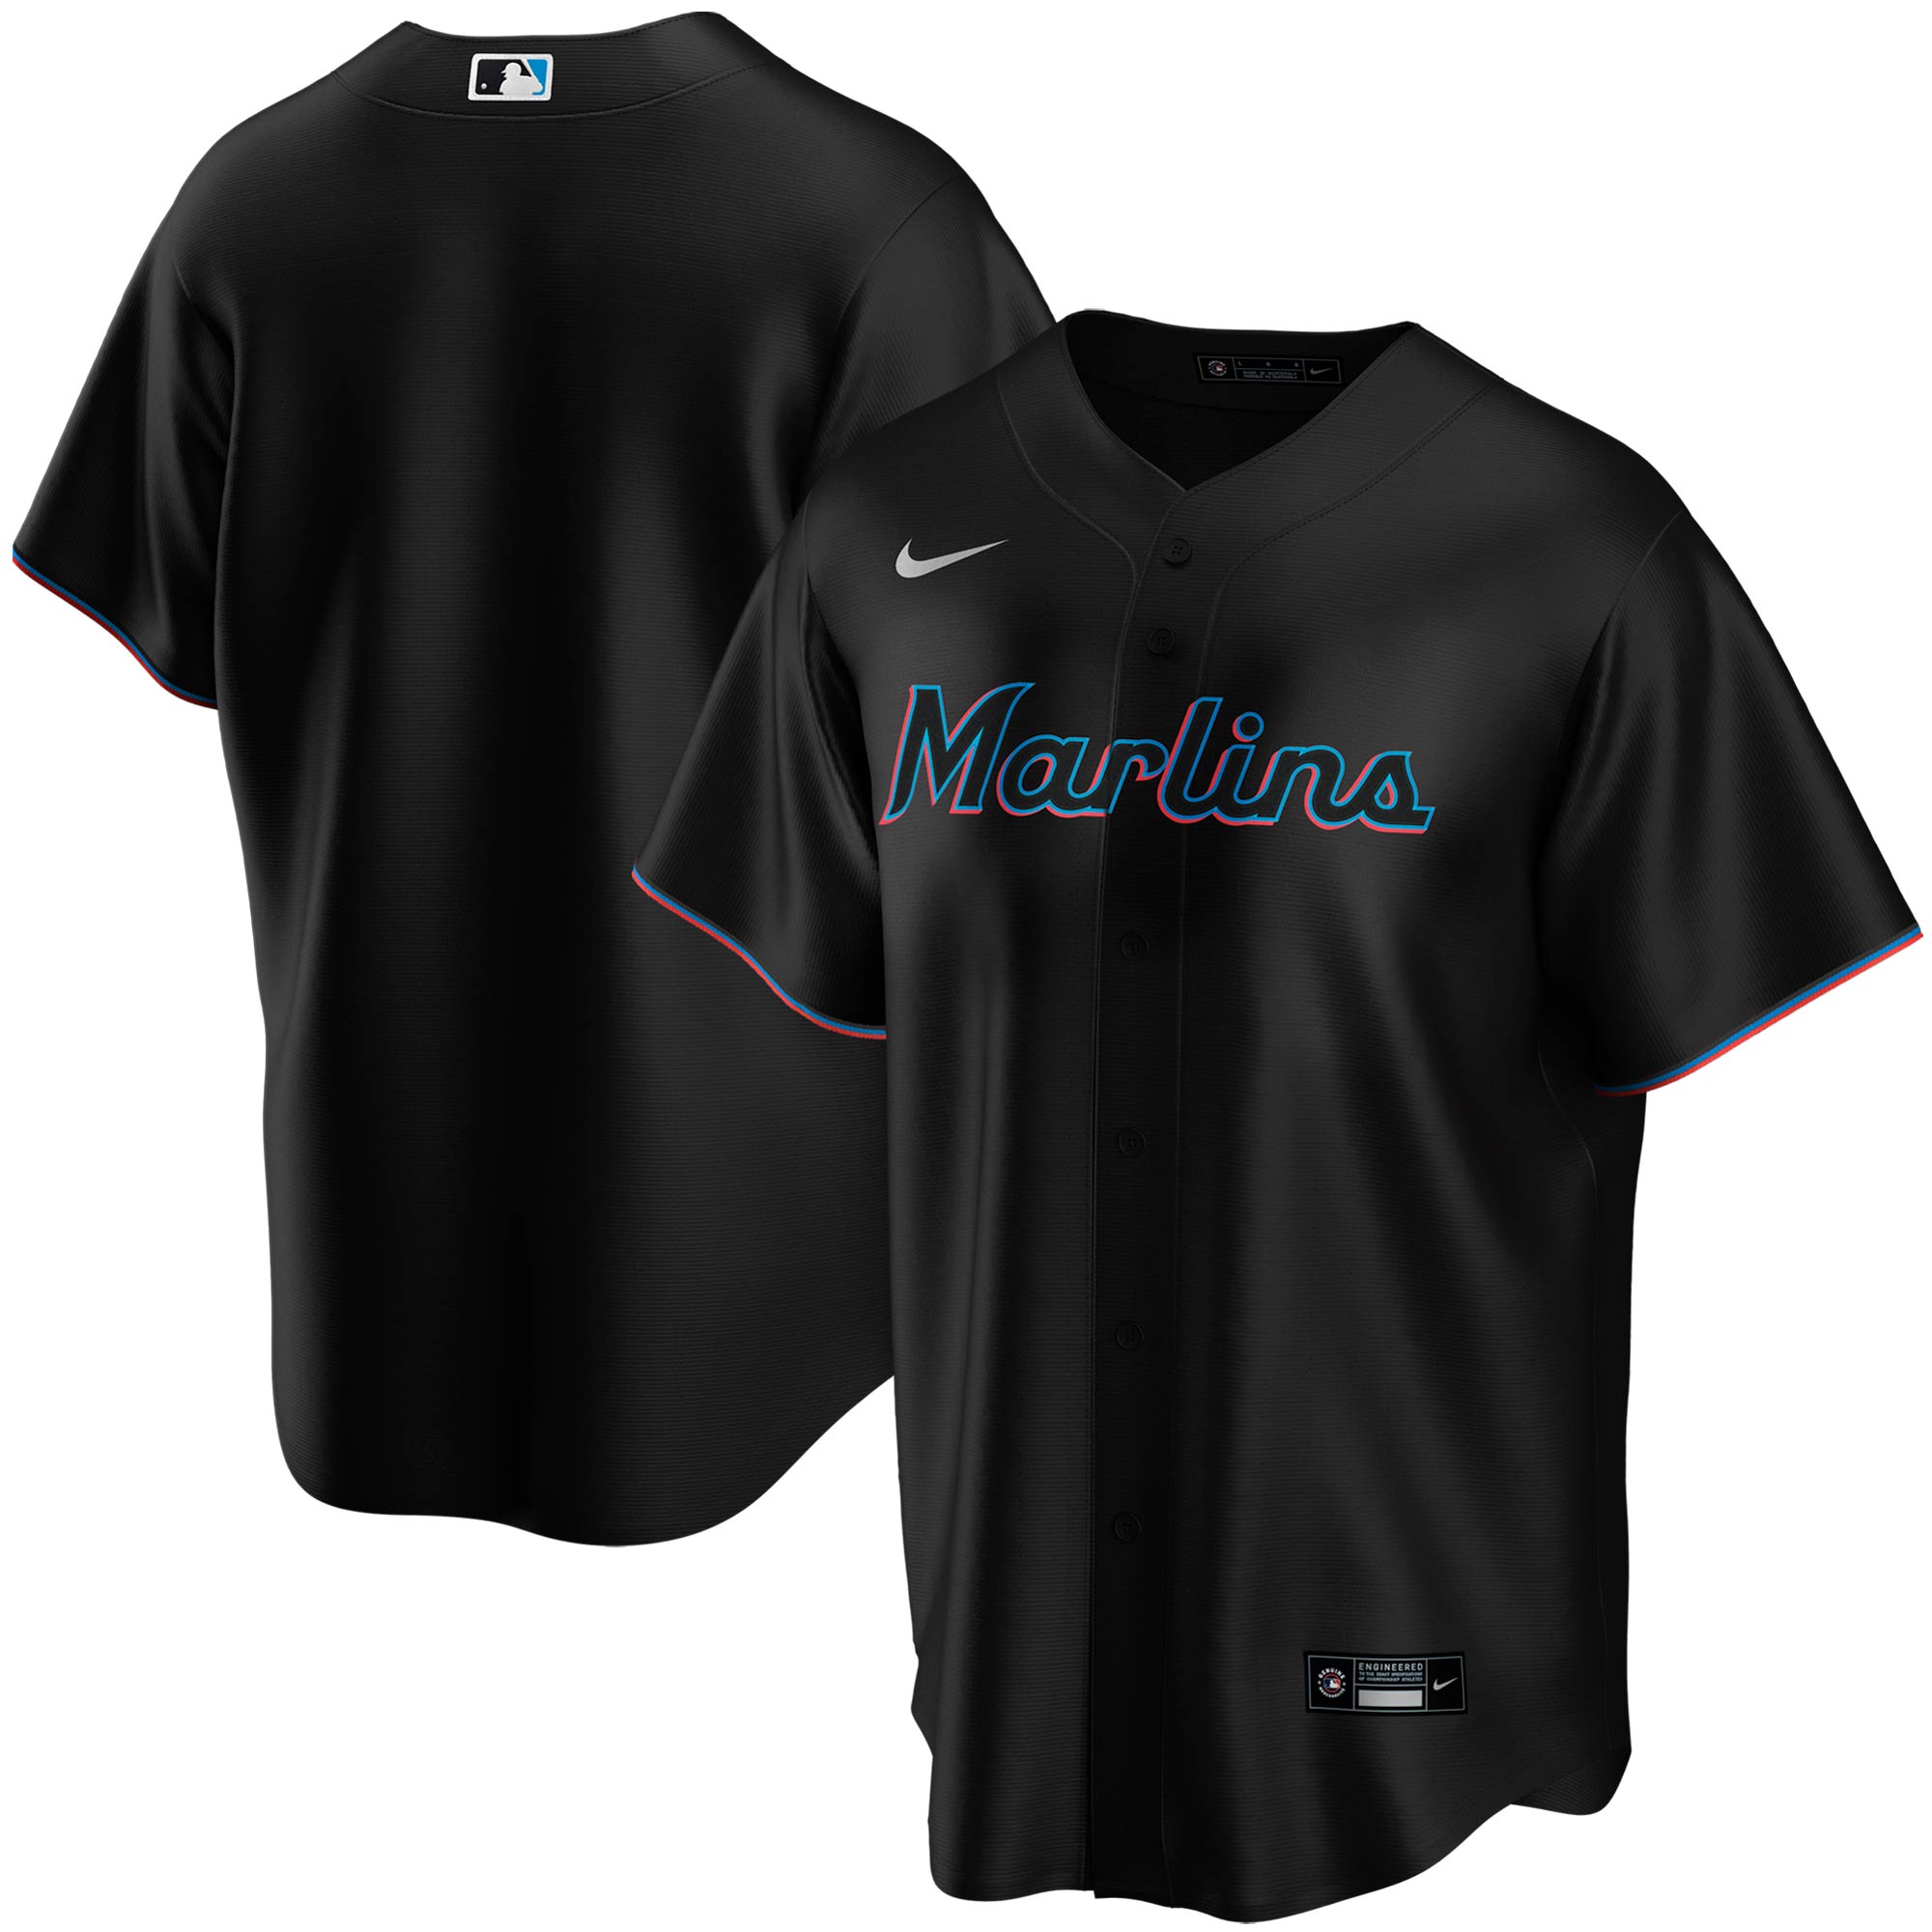 Youth Marlins jersey